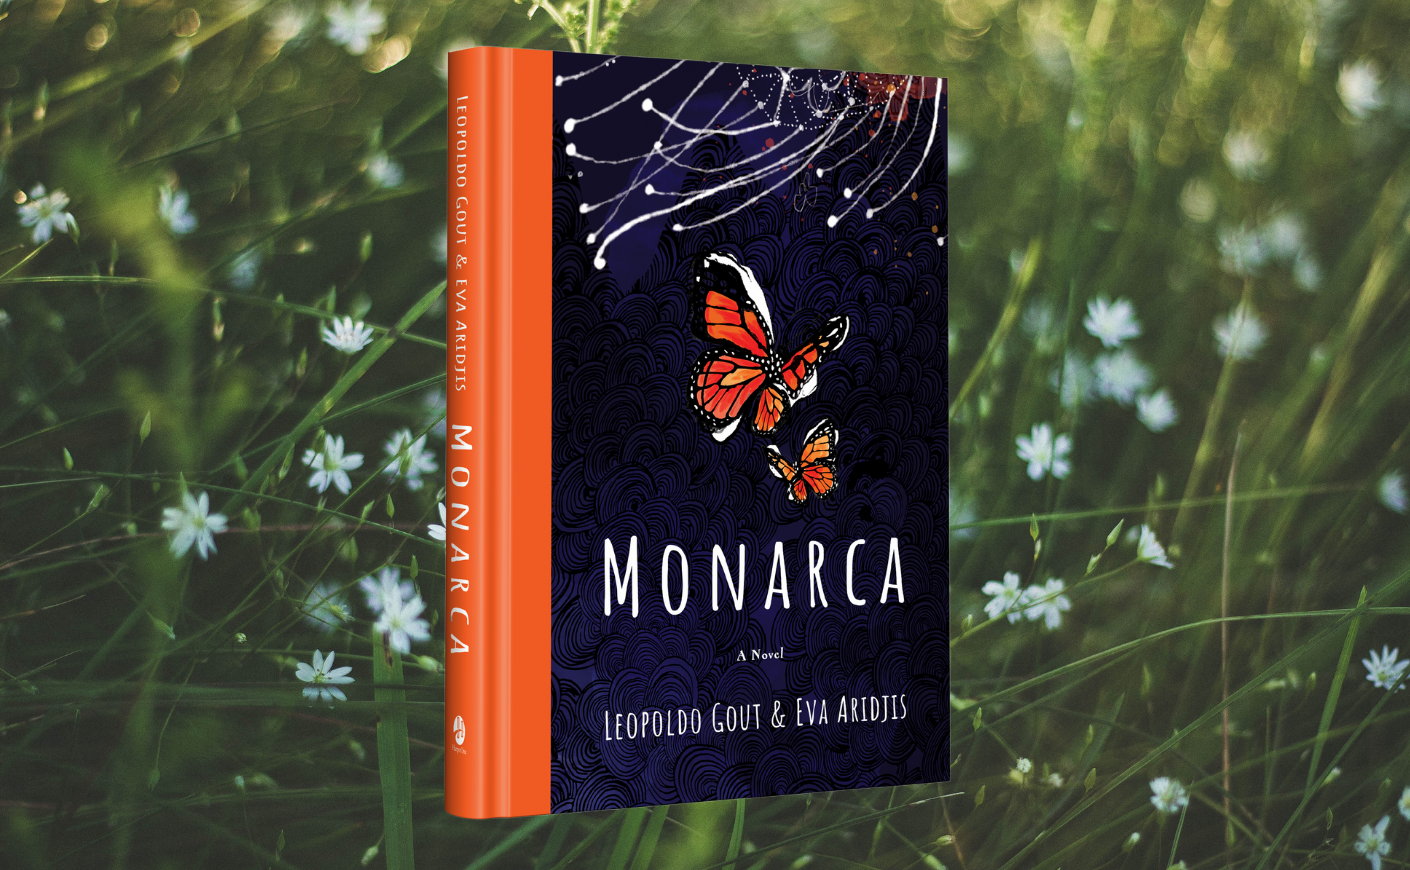 The cover of Monarca